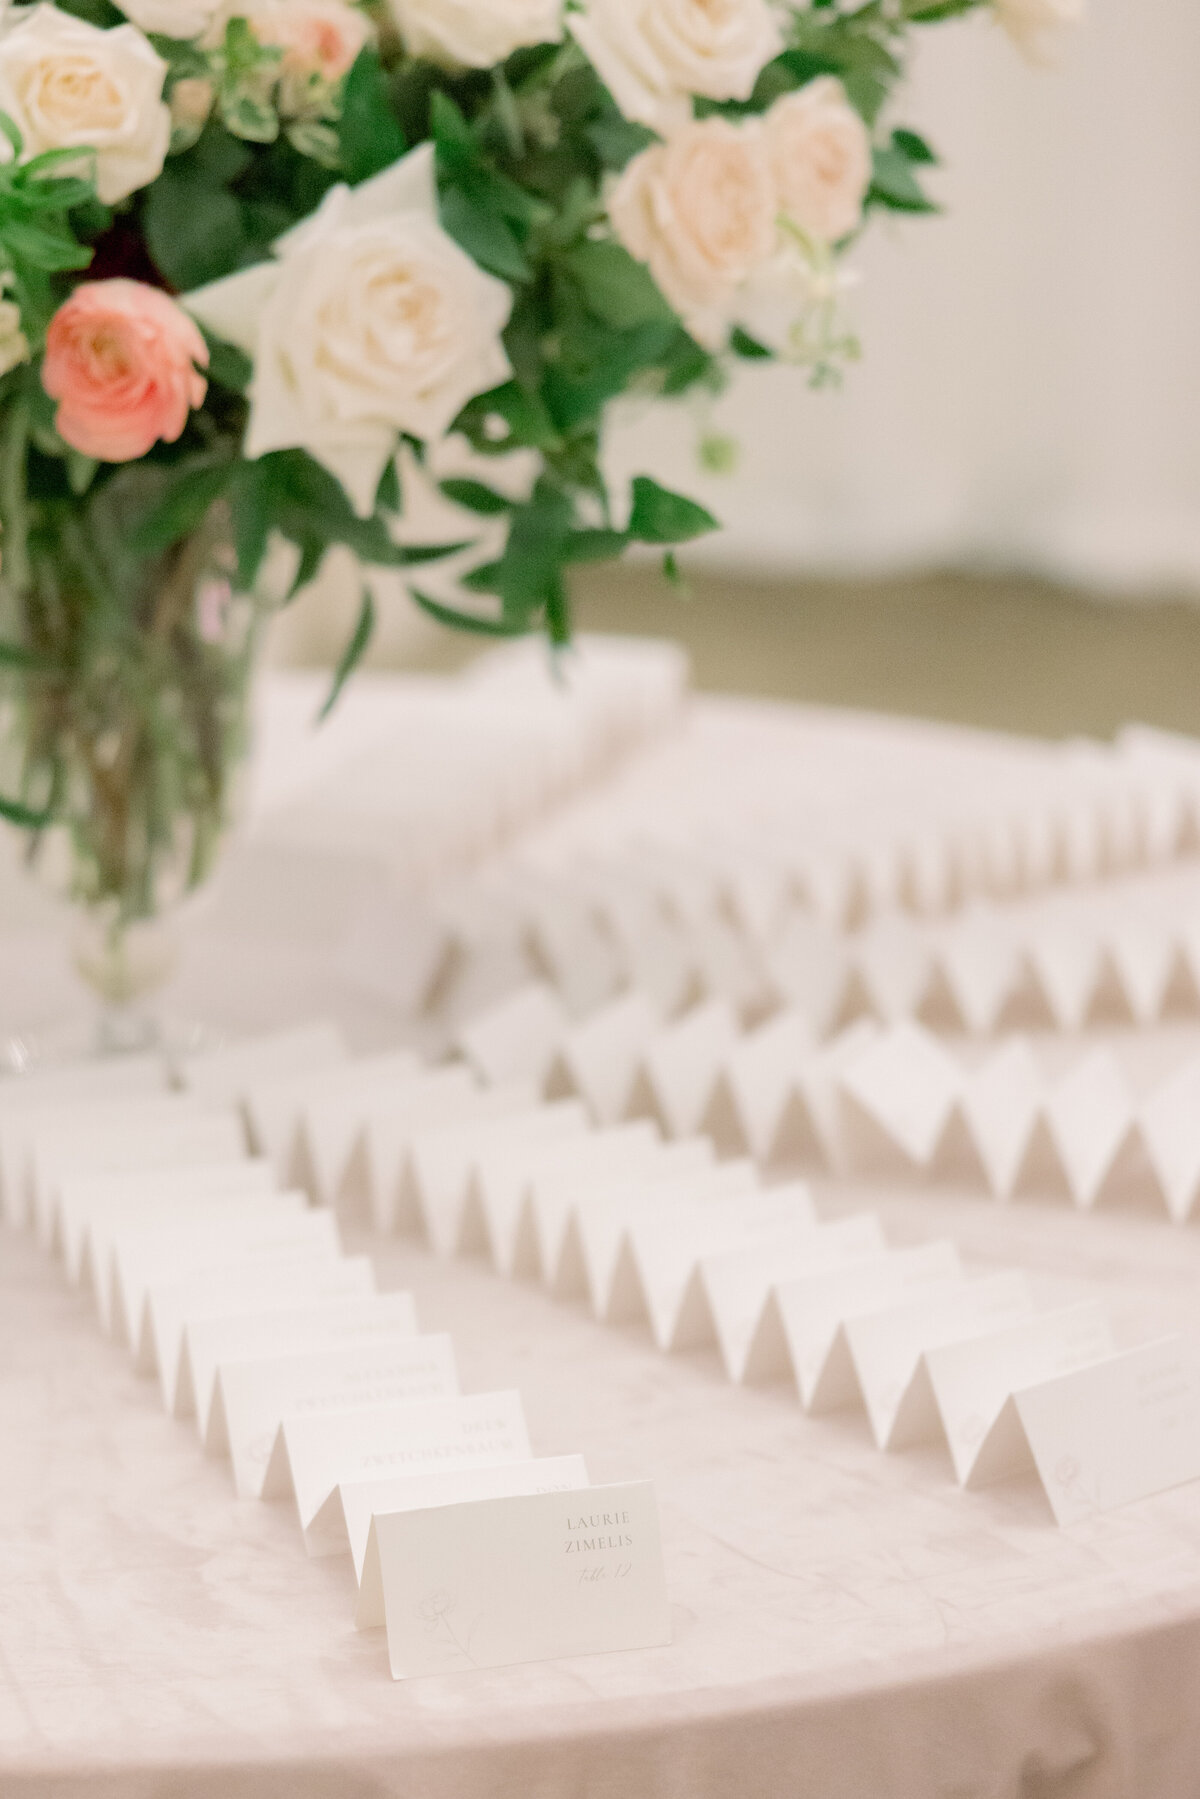 romantic-traditional-guest-place-card-table-long-stem-roses